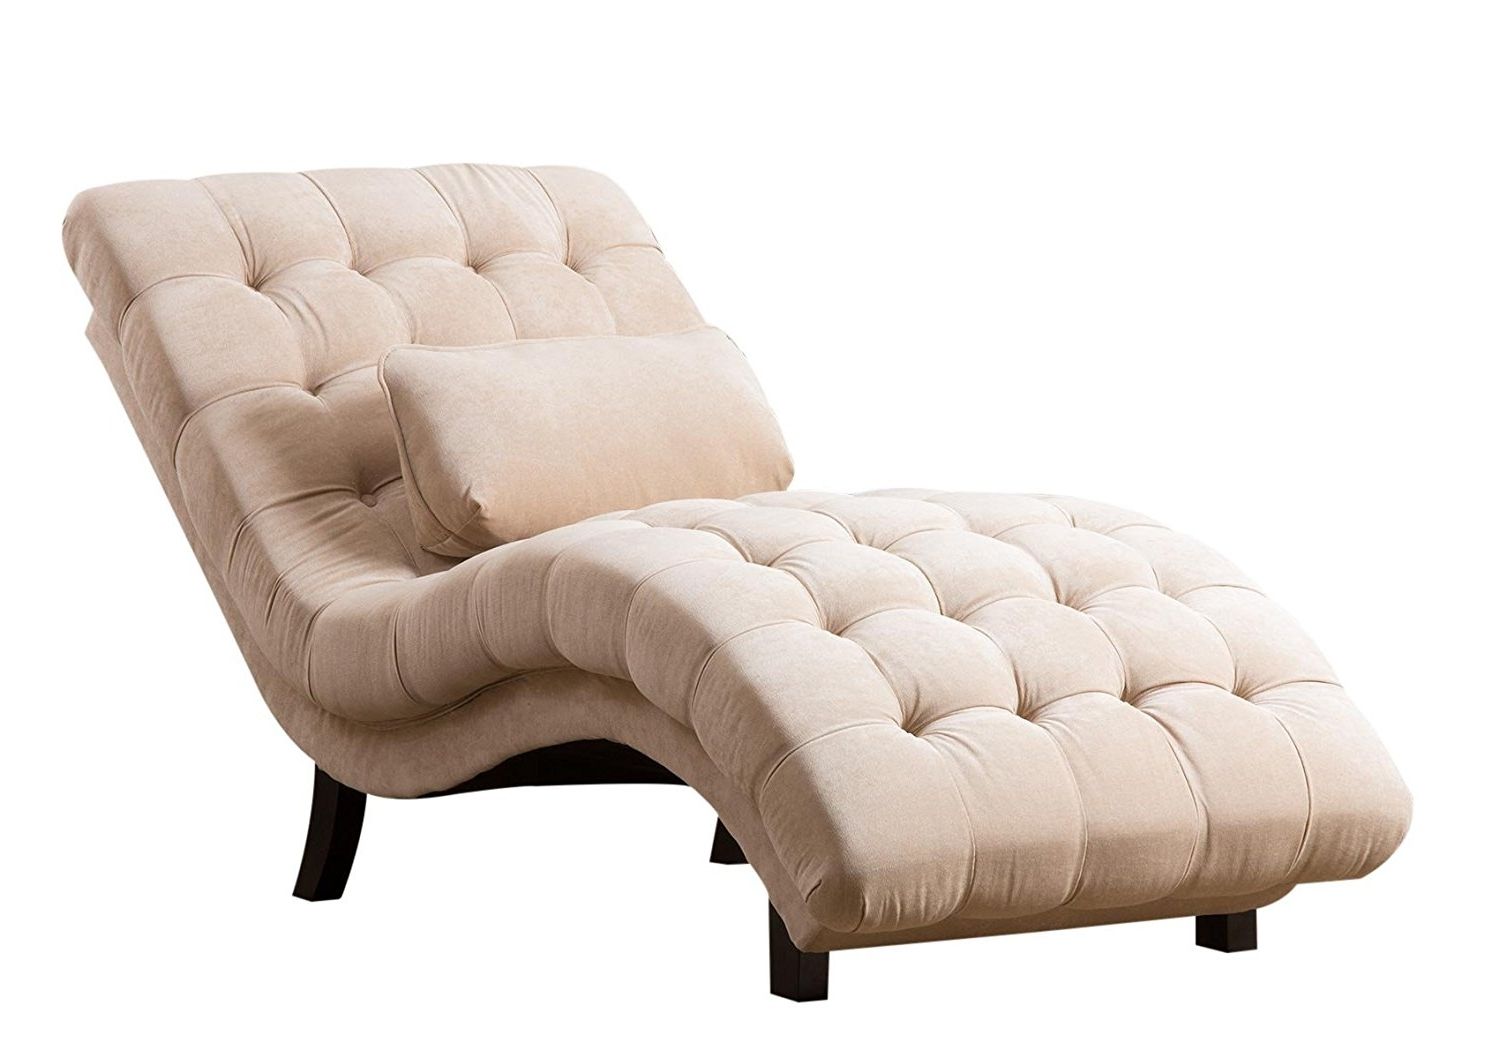 Trendy Fabric Chaise Lounge Chairs With Regard To Amazon: Abbyson Carmen Cream Fabric Chaise: Home & Kitchen (View 4 of 15)